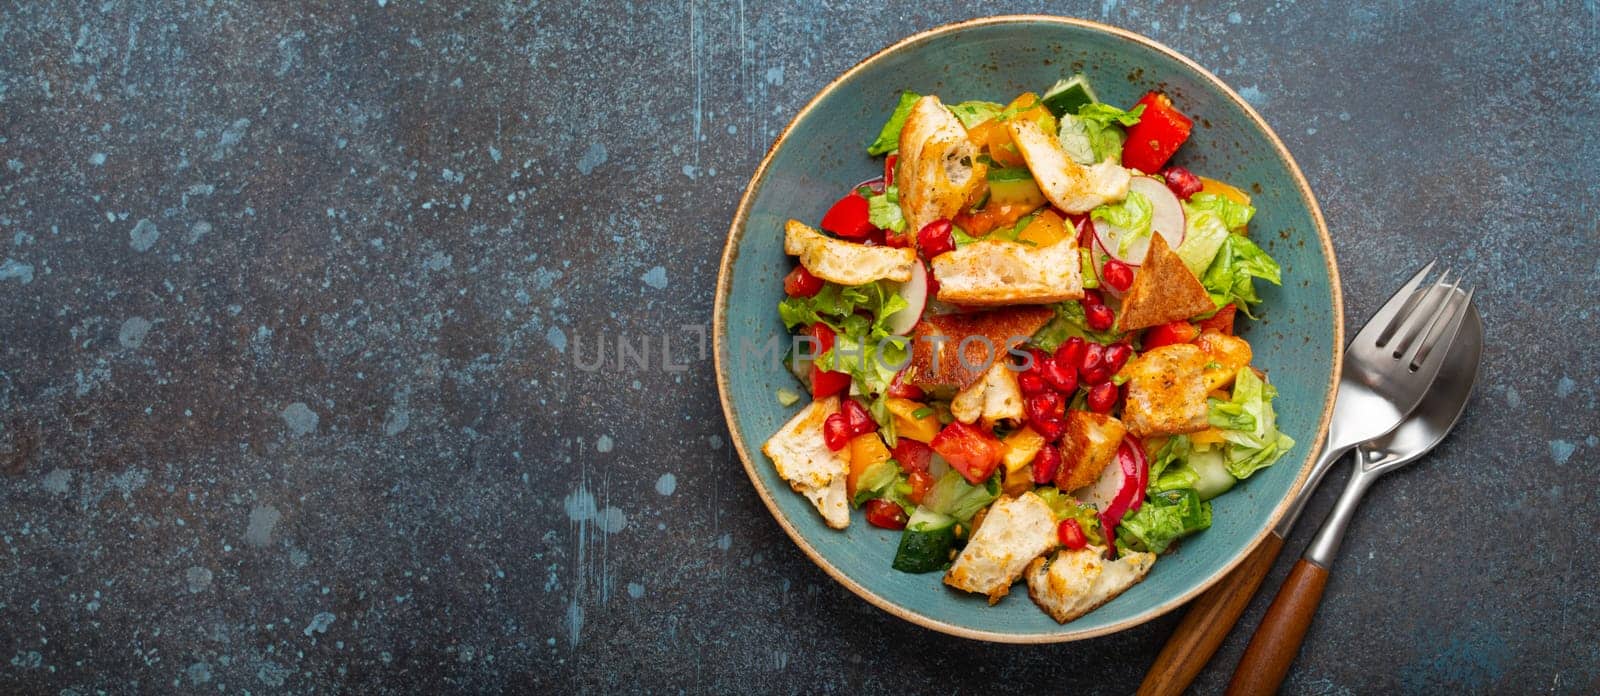 Traditional Levant dish Fattoush salad, Arab cuisine, made with pita bread croutons, vegetables and herbs. Healthy Middle Eastern vegetarian salad on plate, rustic dark blue background top view by its_al_dente